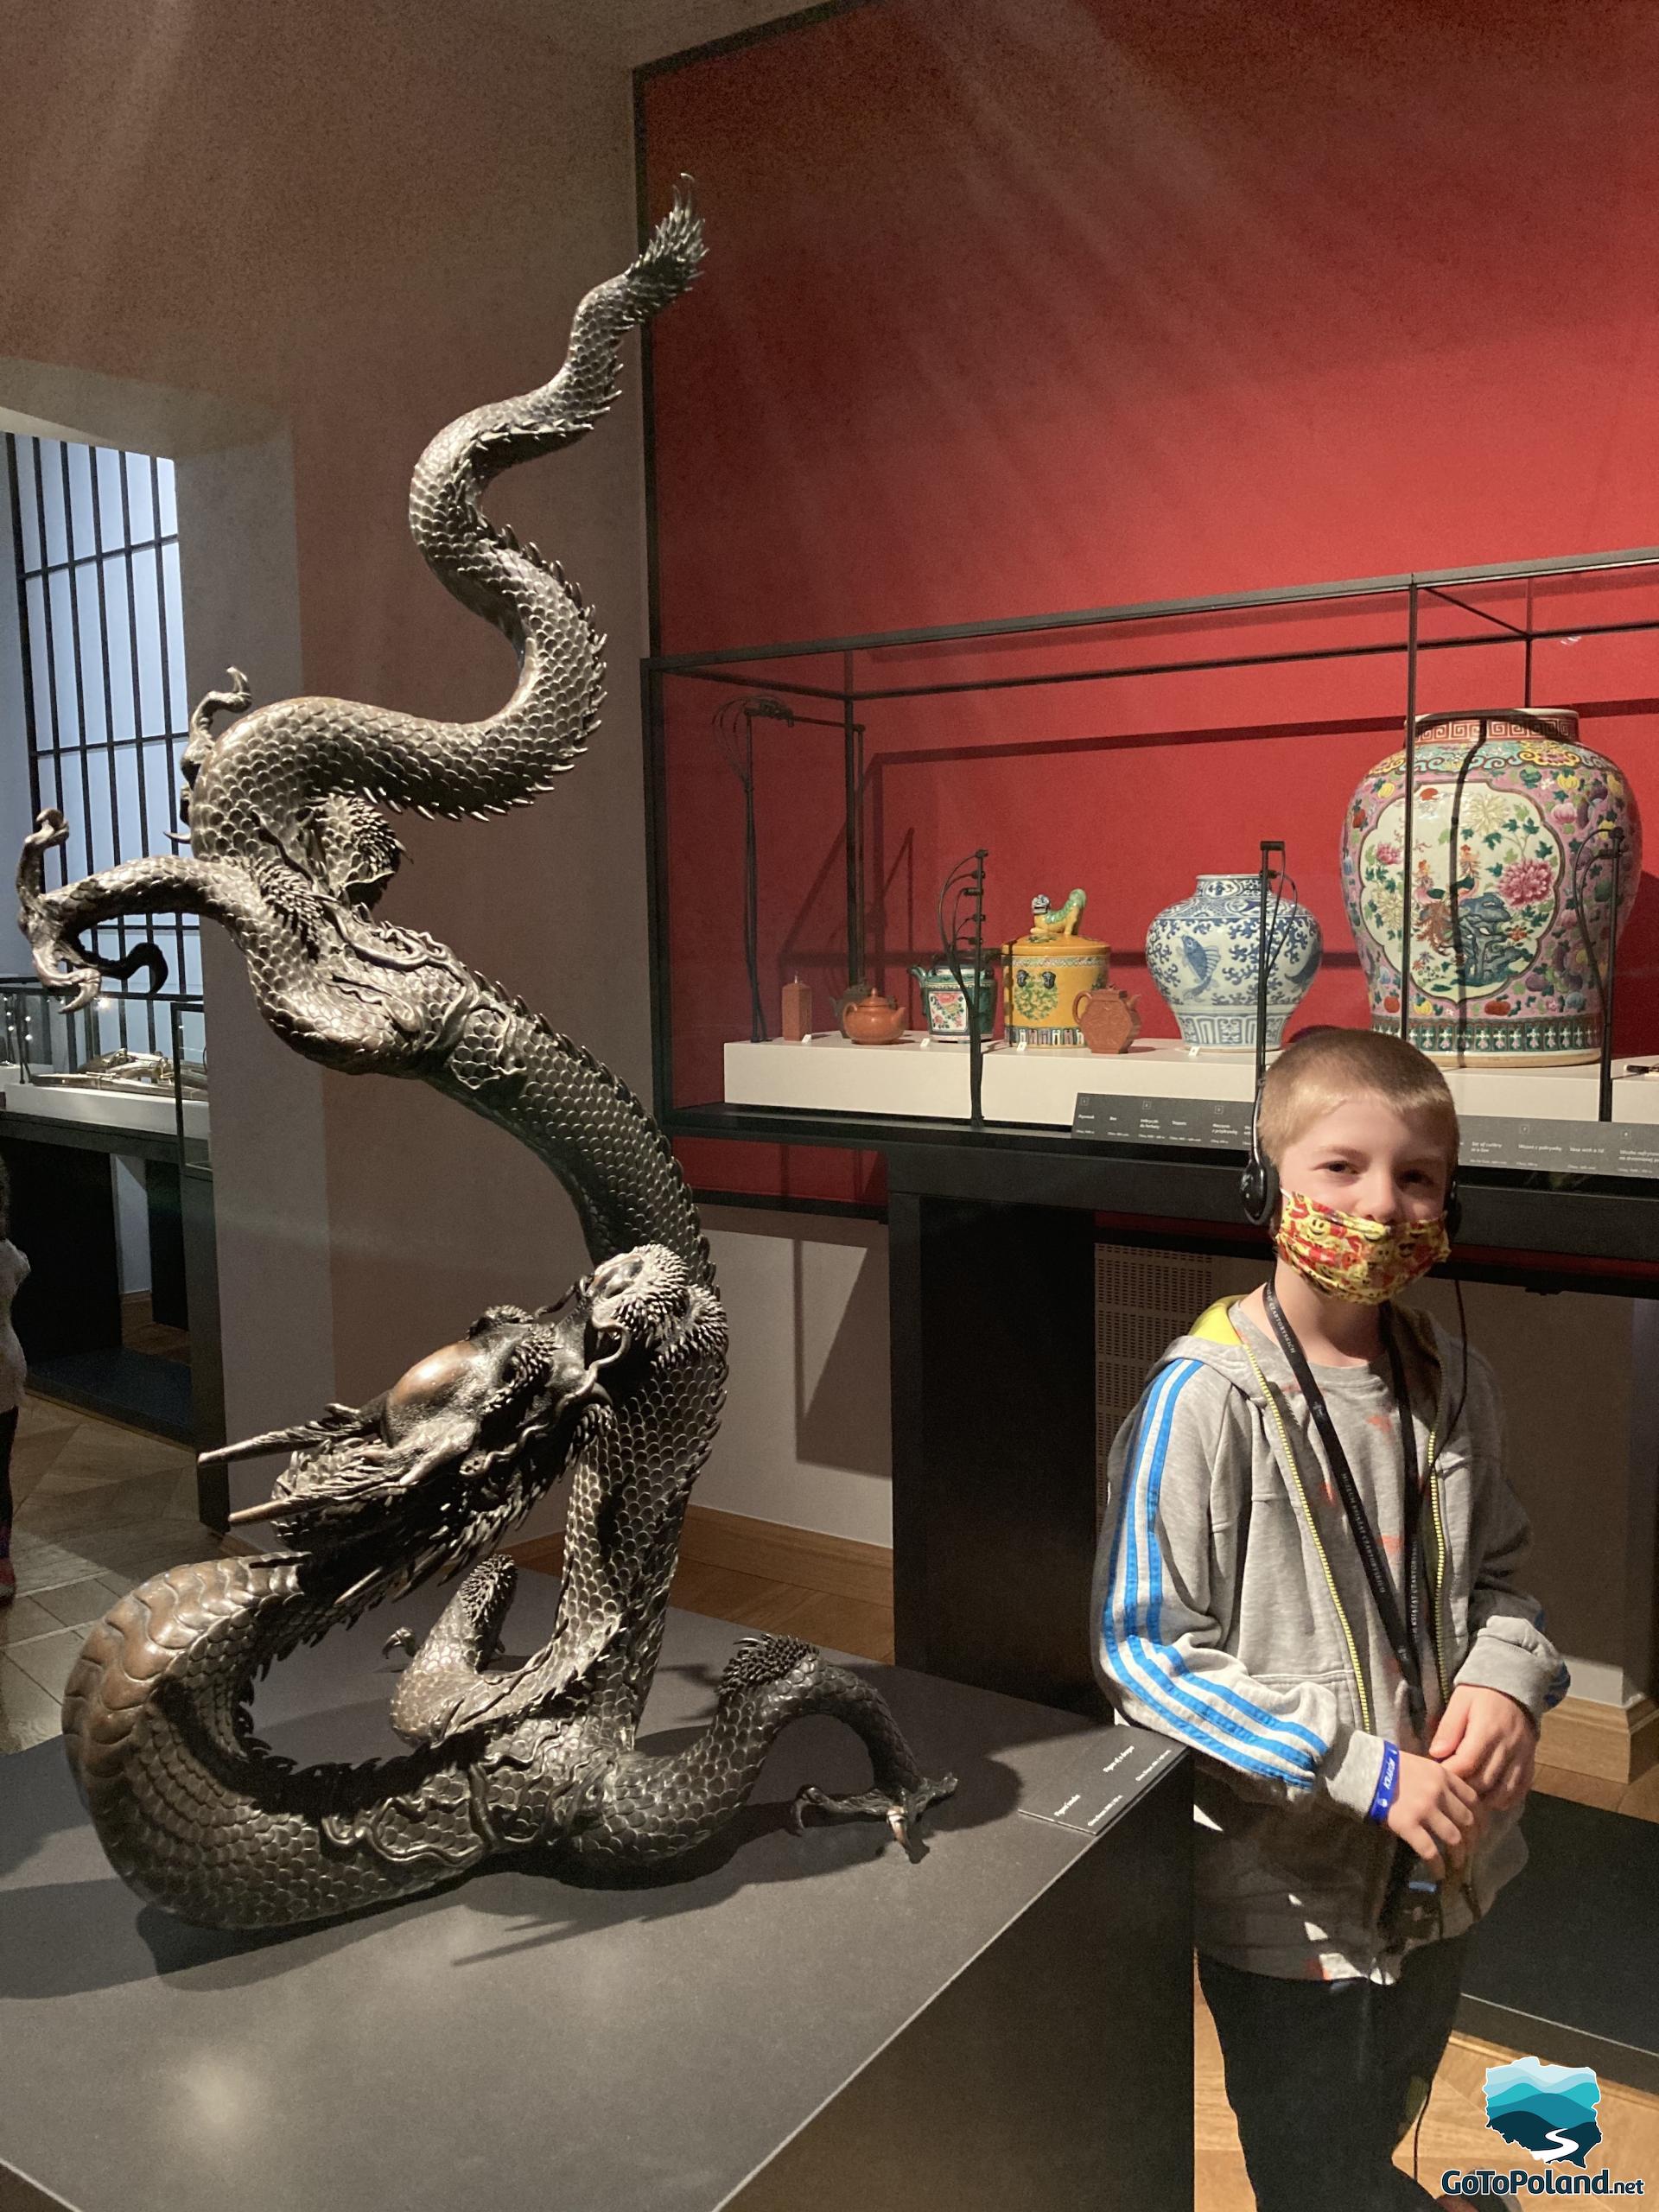 A boy is standing by the figure of a snake. Behind him there are some vases 